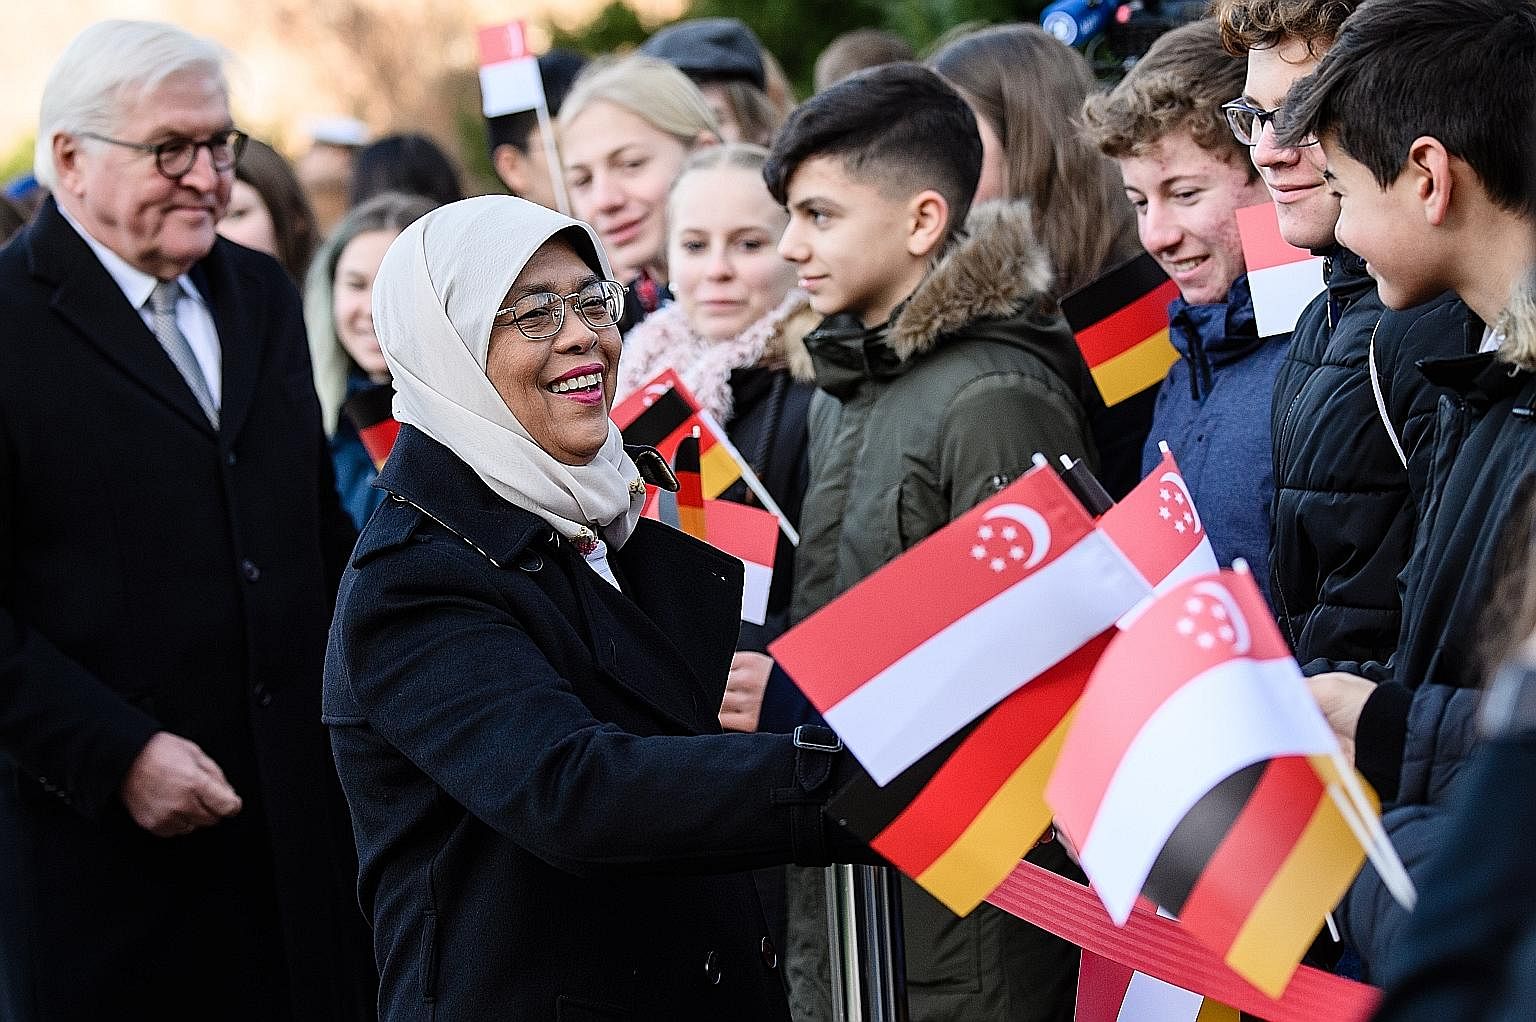 President Halimah Yacob meeting students from Berlin's Walther-Rathenau Gymnasium yesterday following a welcome ceremony at Schloss Bellevue, the official residence of German President Frank-Walter Steinmeier (far left). Both heads of state reaffirme